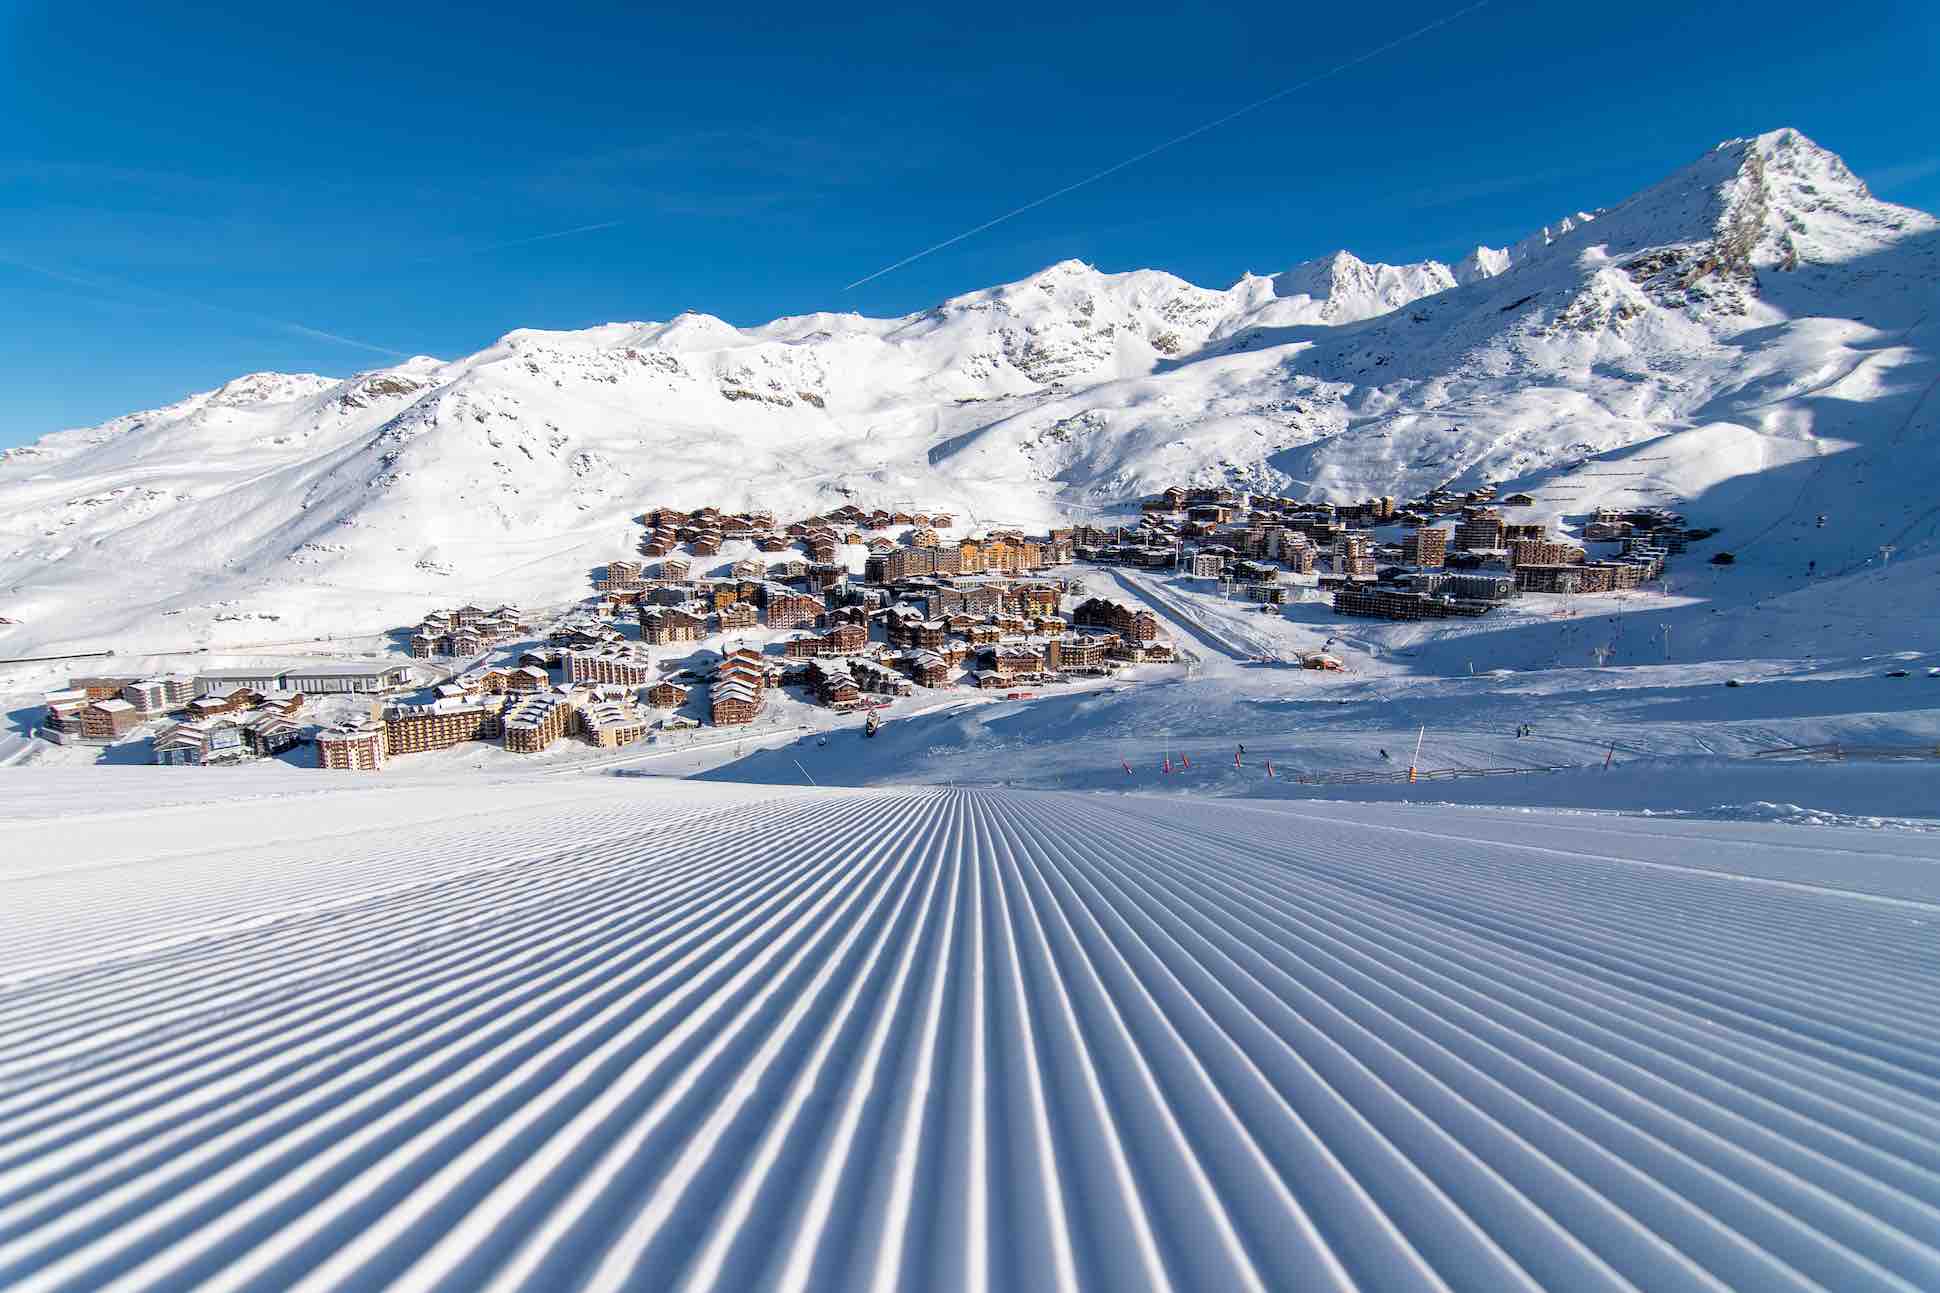 Why Val Thorens